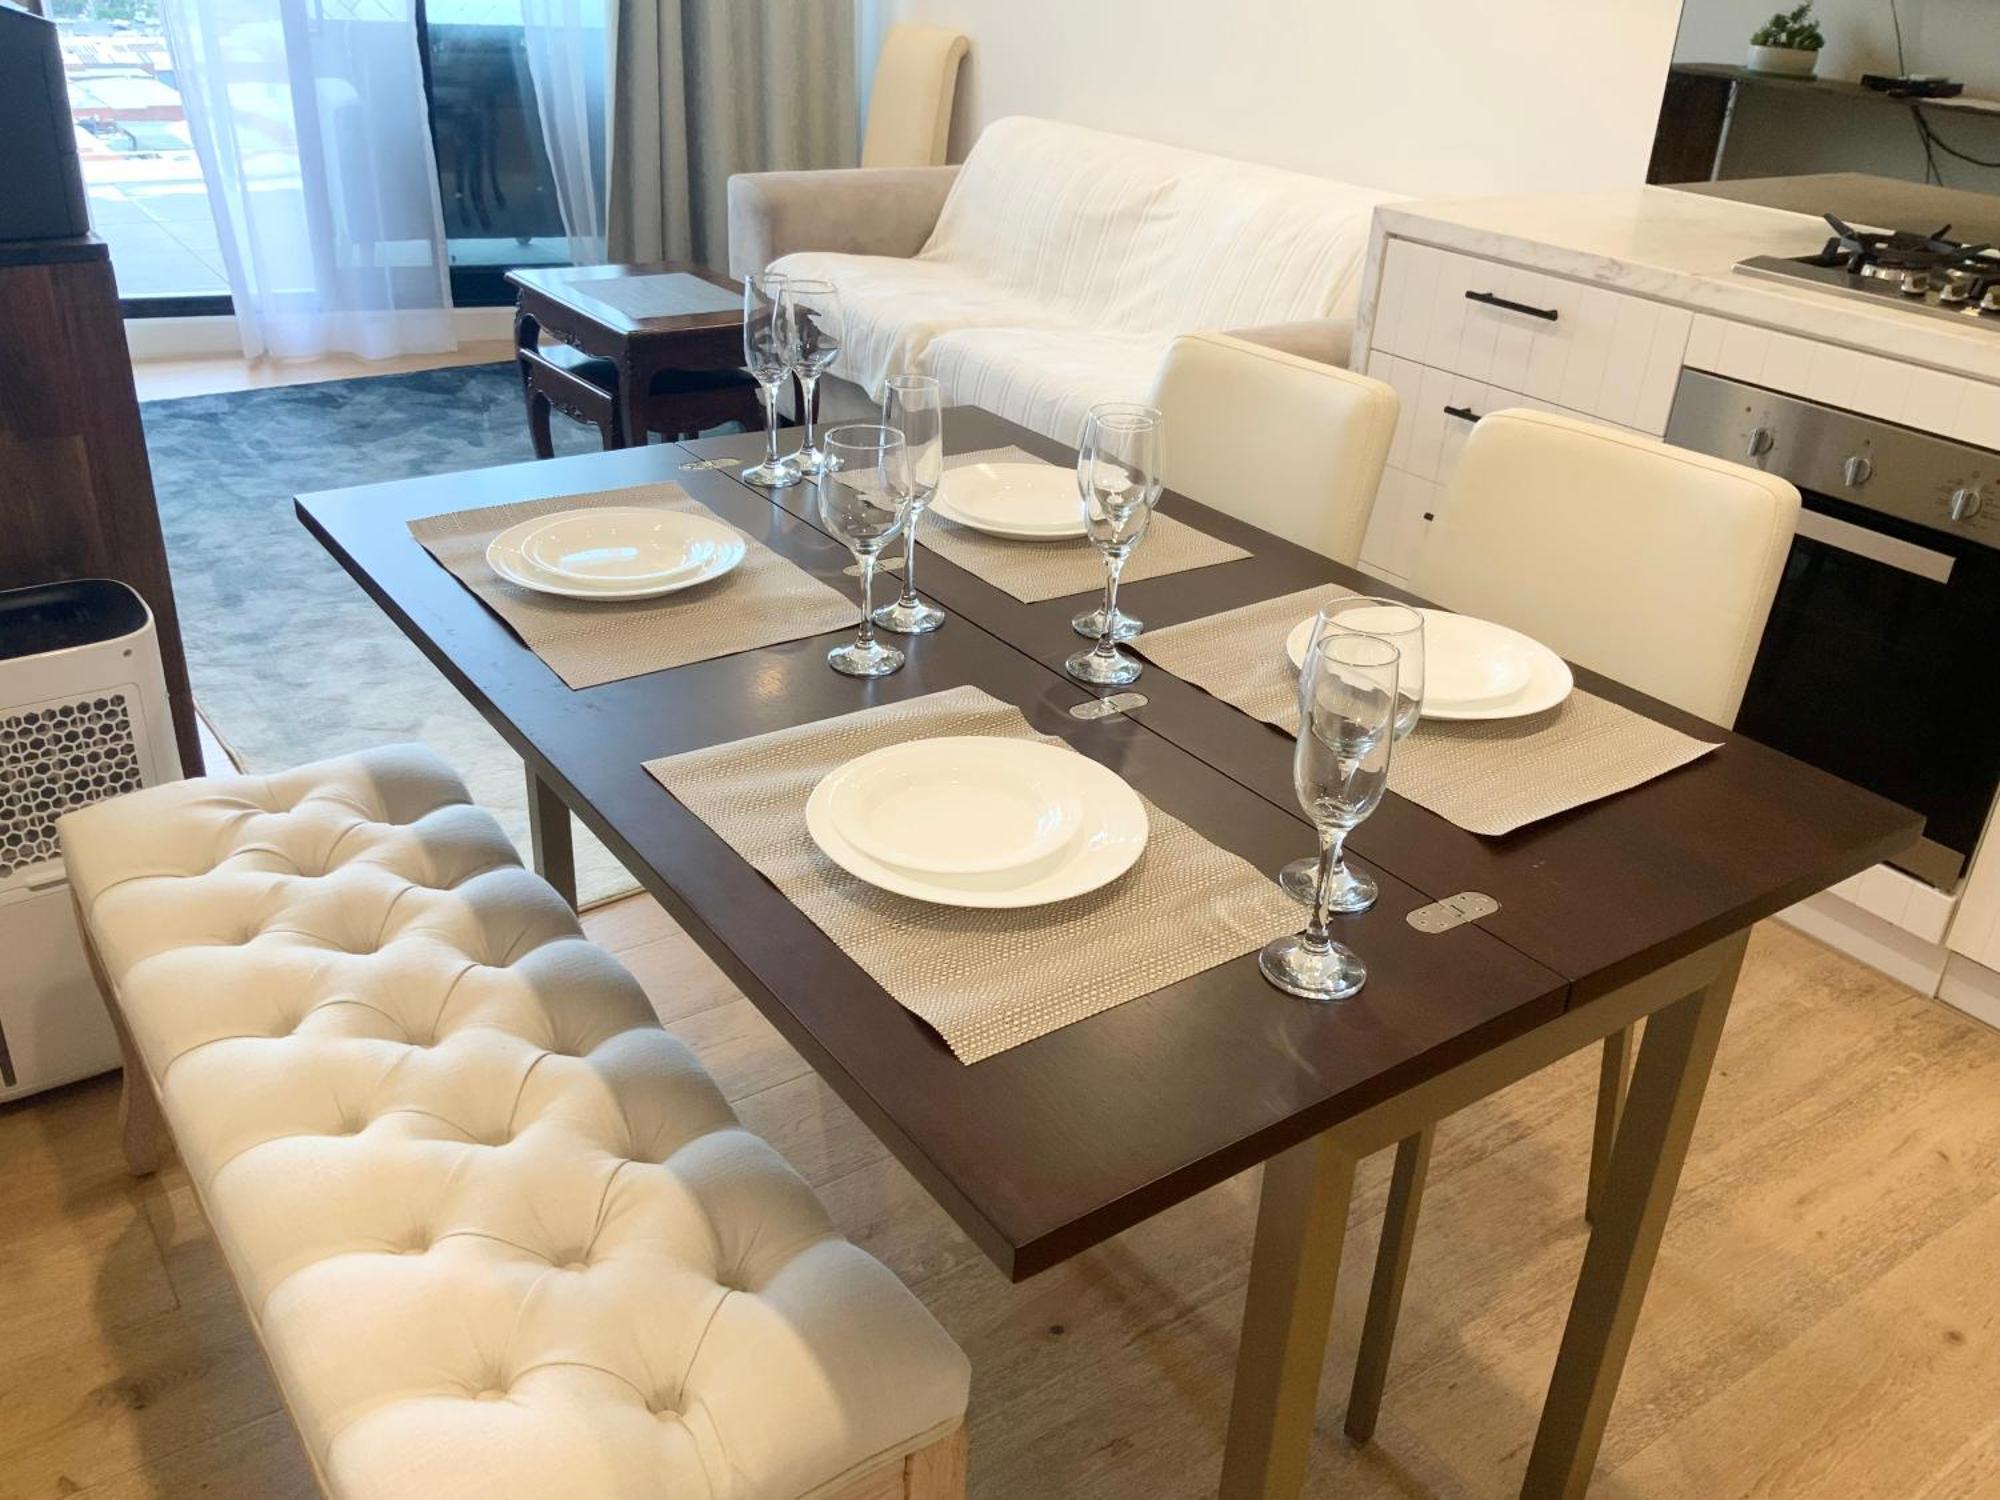 M-City Apartment - Executive Twin King Ensuites - Fully Equipped - Free Parking, Fast Wifi, Smart Tv, Netflix, Complementary Drinks & Amenities - M-City Shopping Centre Clayton 3168 מראה חיצוני תמונה